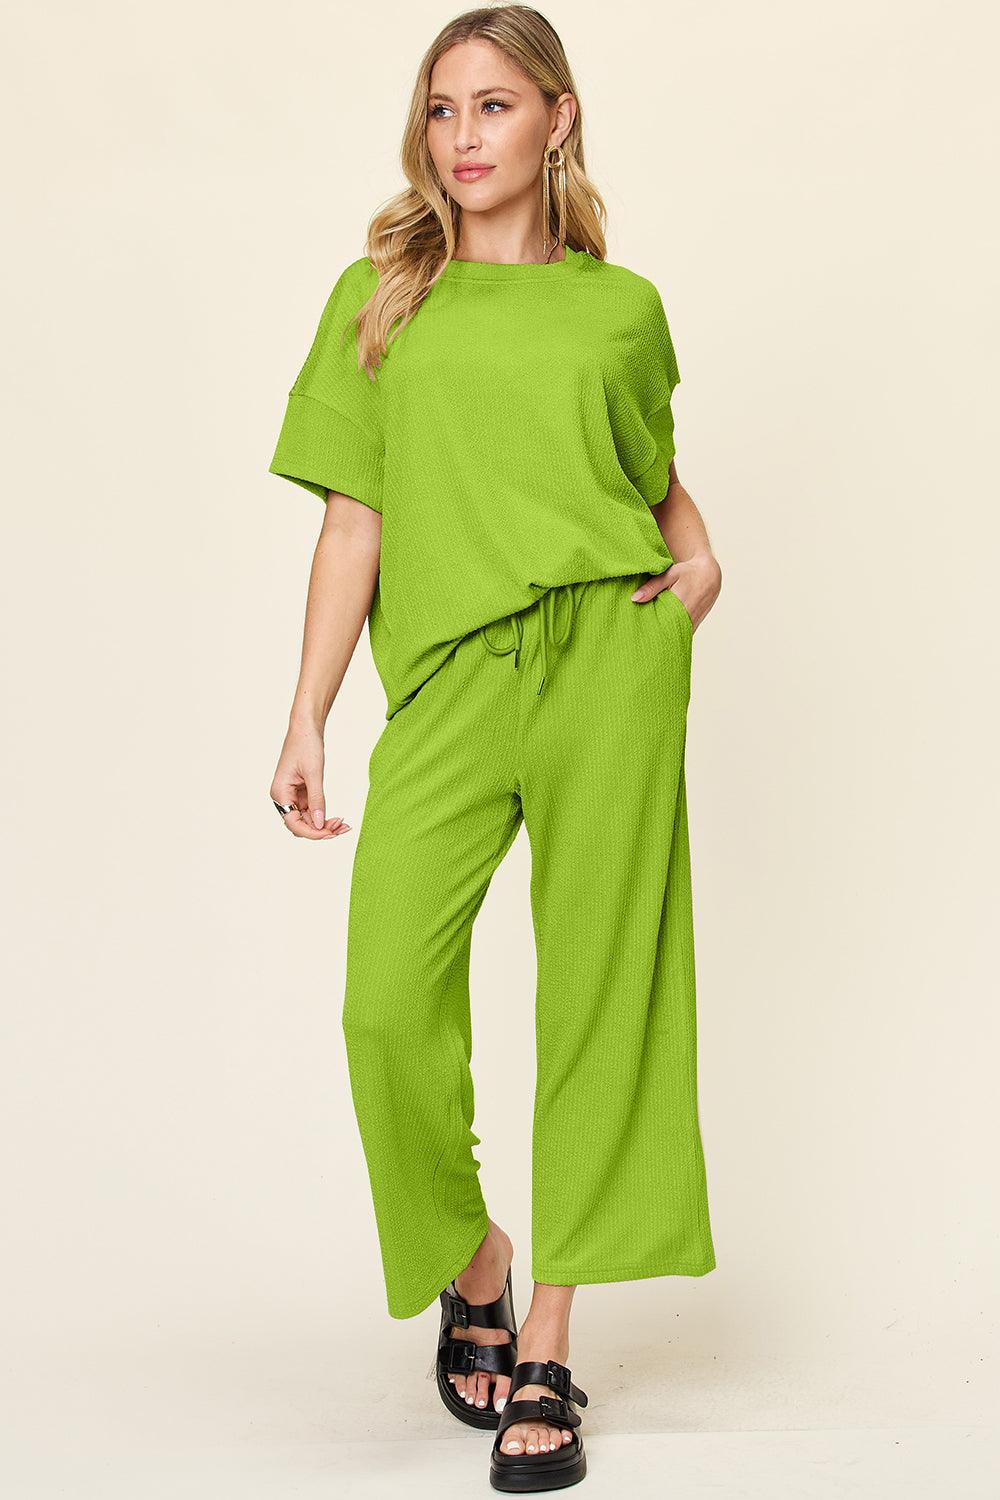 Double Take Full Size Texture Round Neck Short Sleeve T-Shirt and Wide Leg Pants Lime Pants Sets